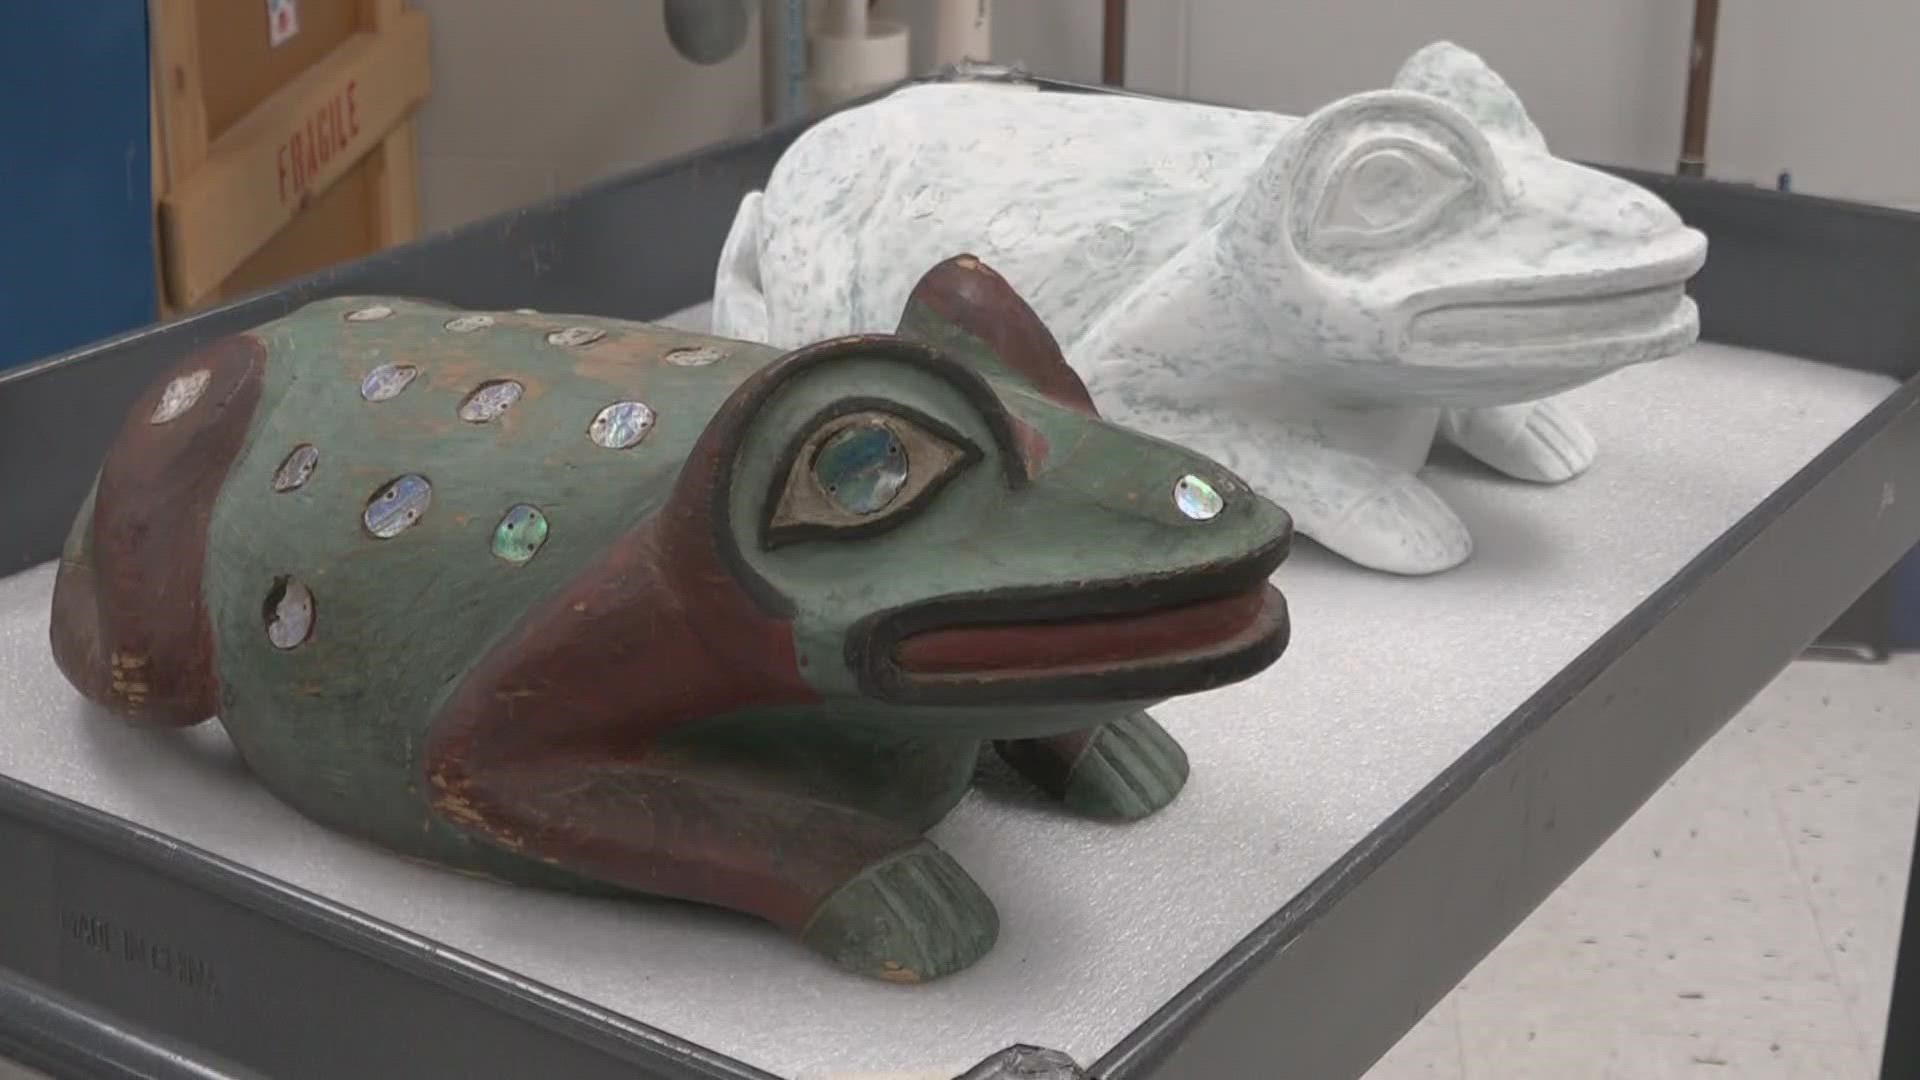 Engineers, artists, and even a museum are working to give an artifact back to the Alaskan tribes it somehow disappeared from in the early 20th century.